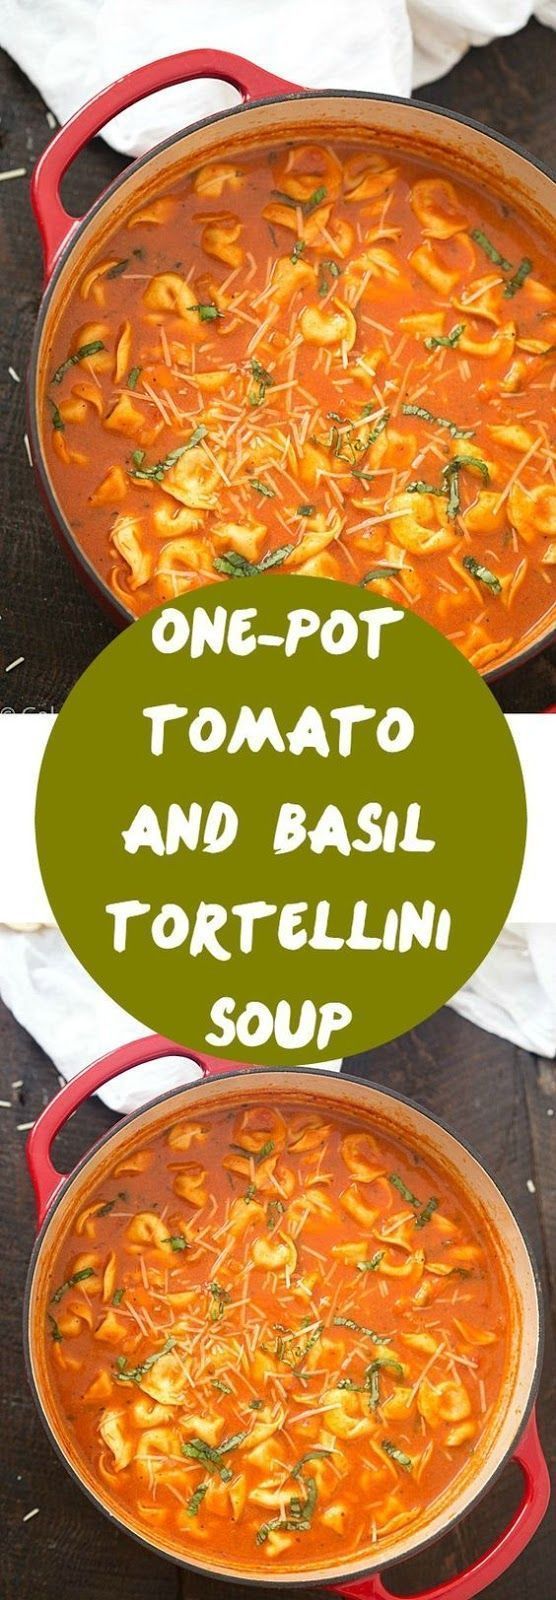 ONE-POT TOMATO AND BASIL TORTELLINI SOUP -   16 fitness meals diaries
 ideas